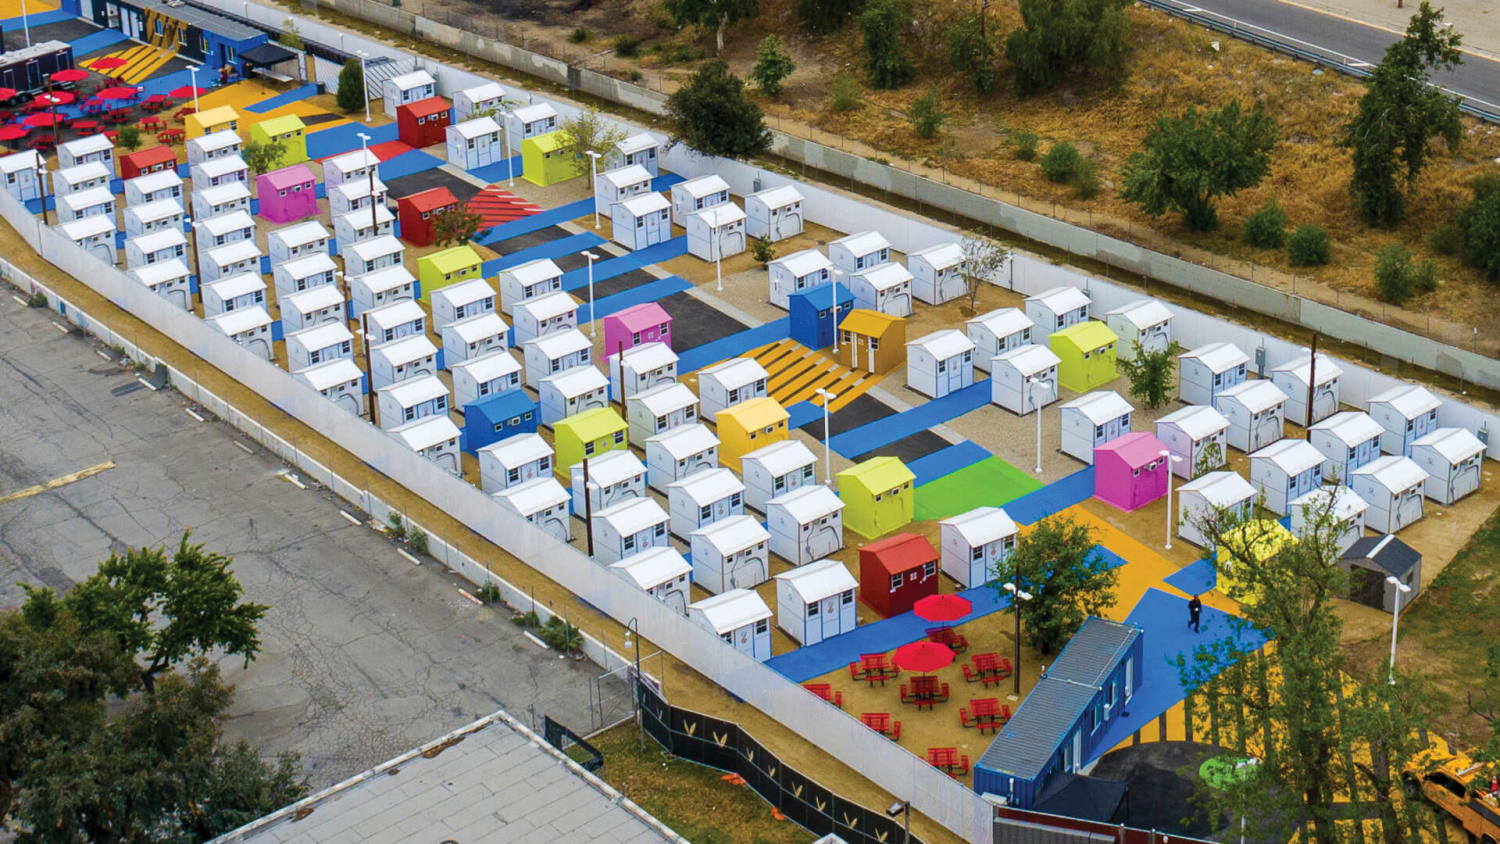 Temporary shelters addressing L.A's homelessness crisis by Lehrer Architects [building]